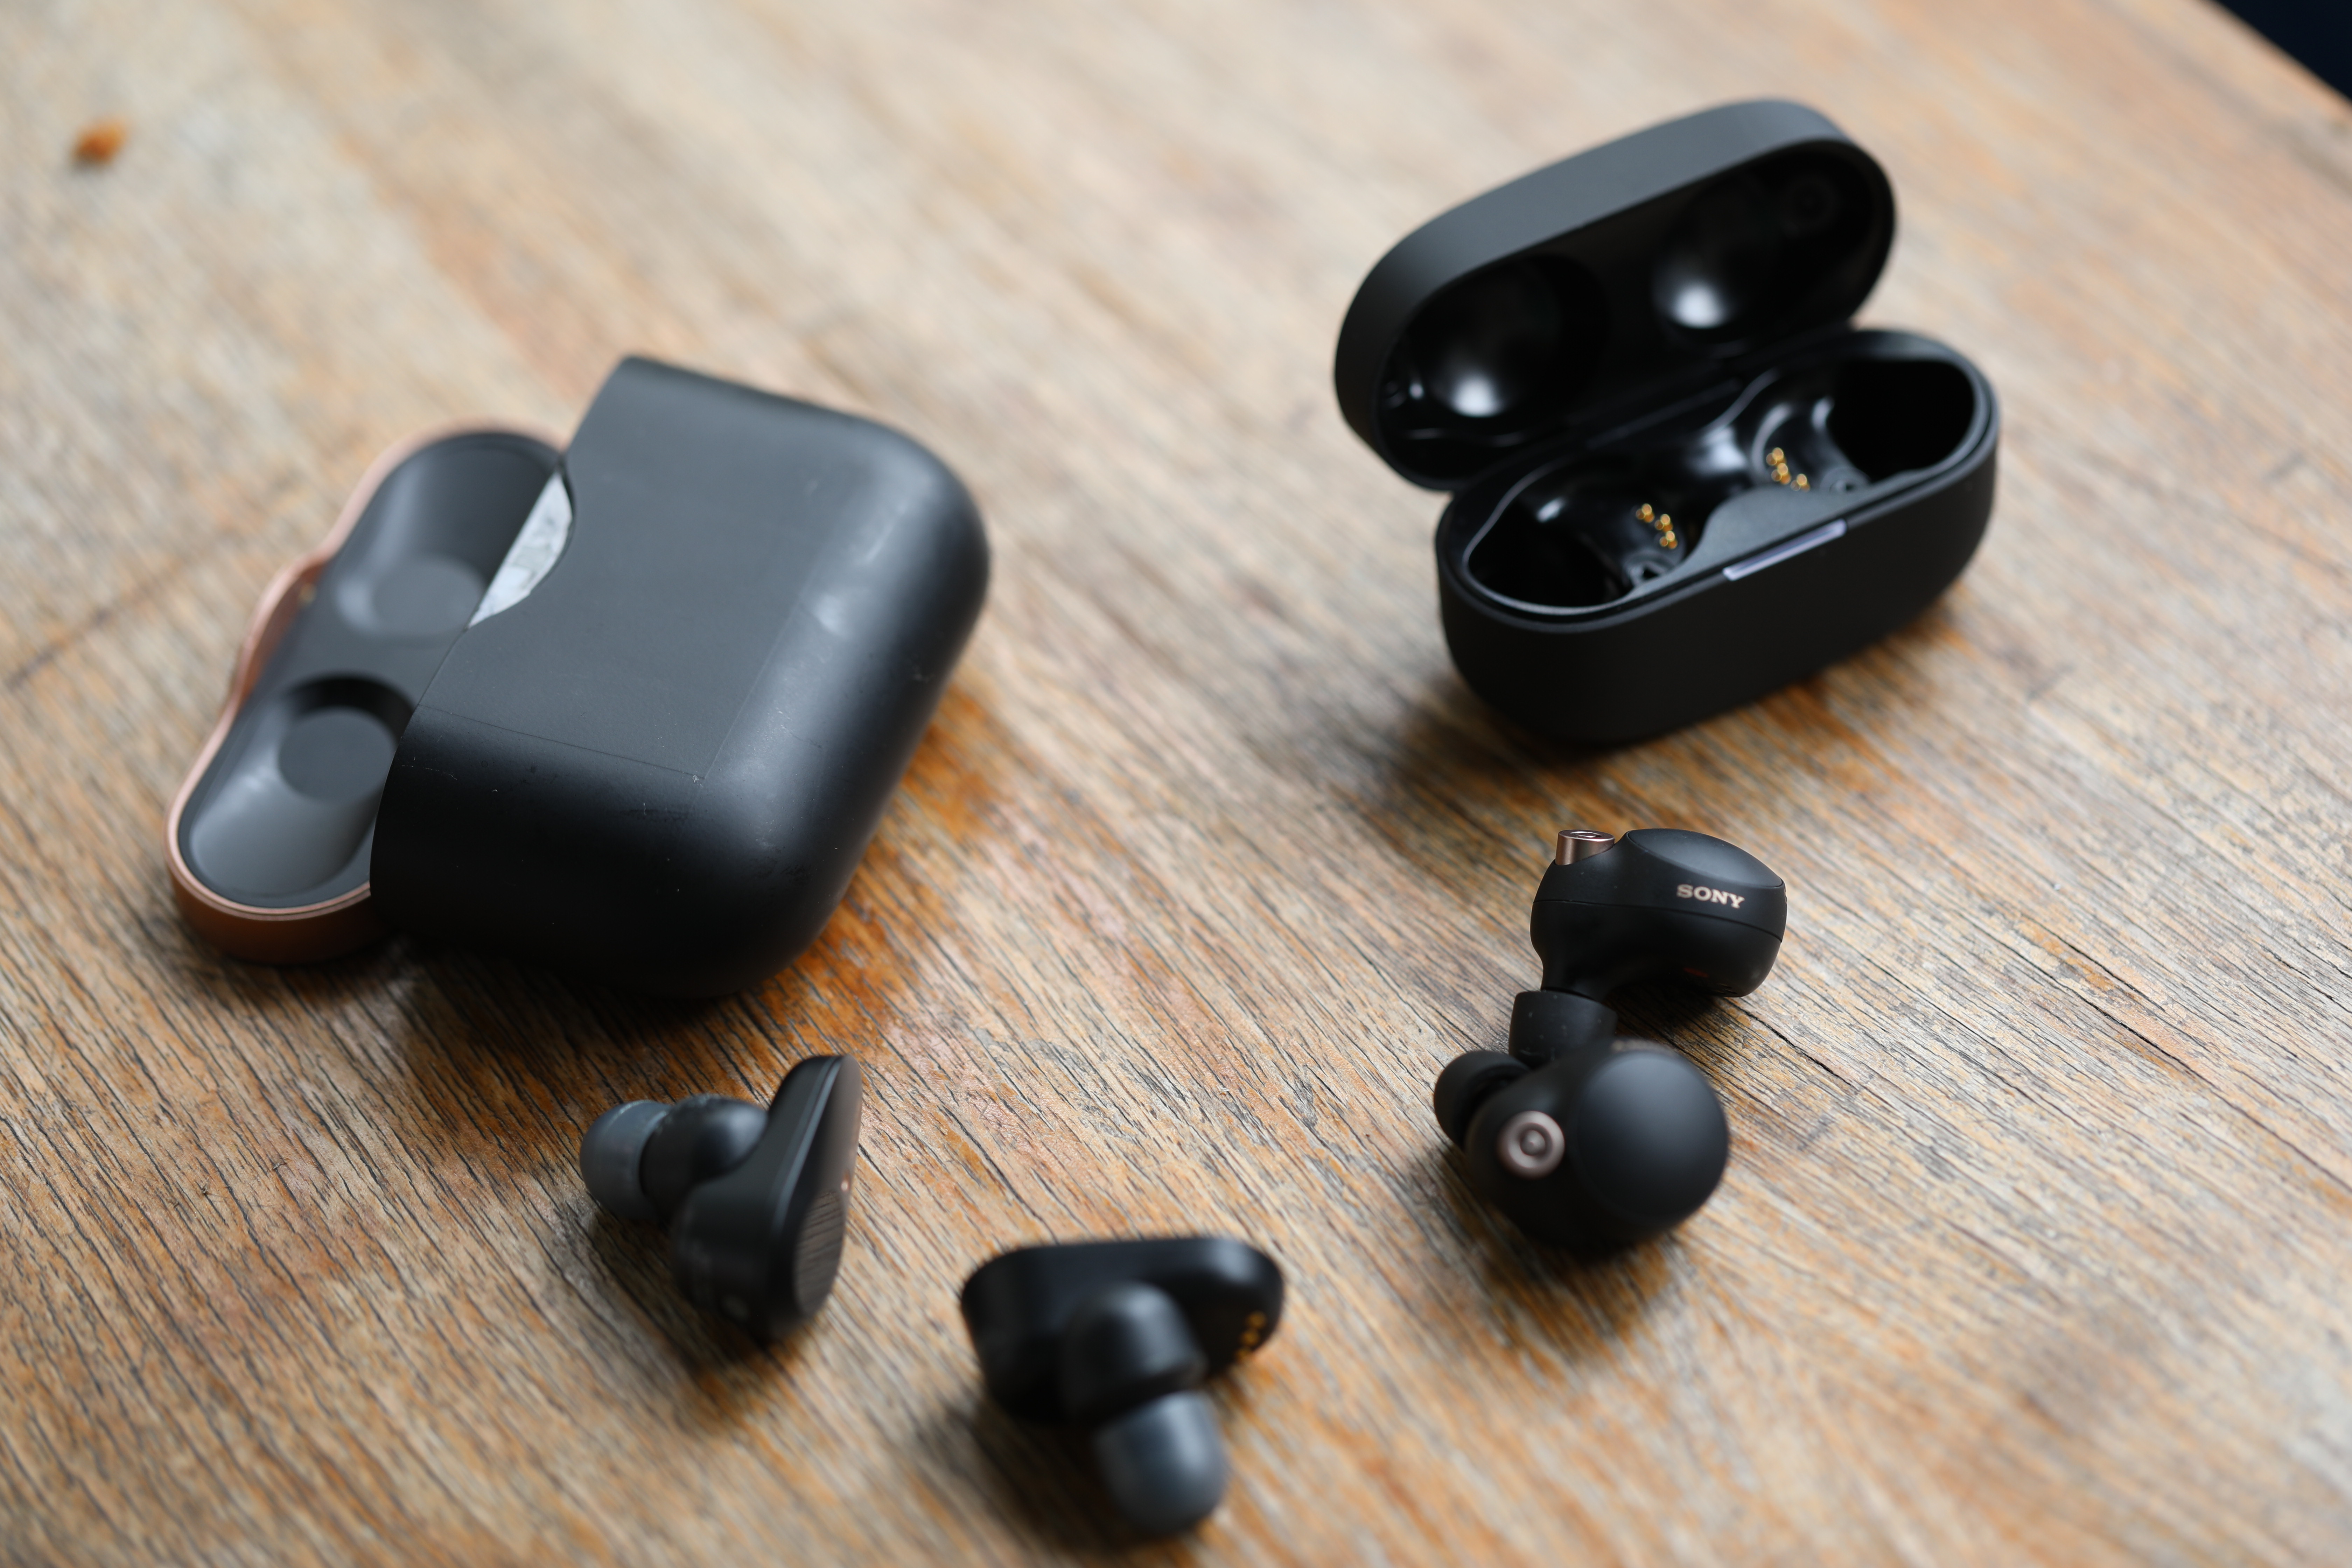 Sony sets a new standard with the WF-1000XM4 earbuds | TechCrunch